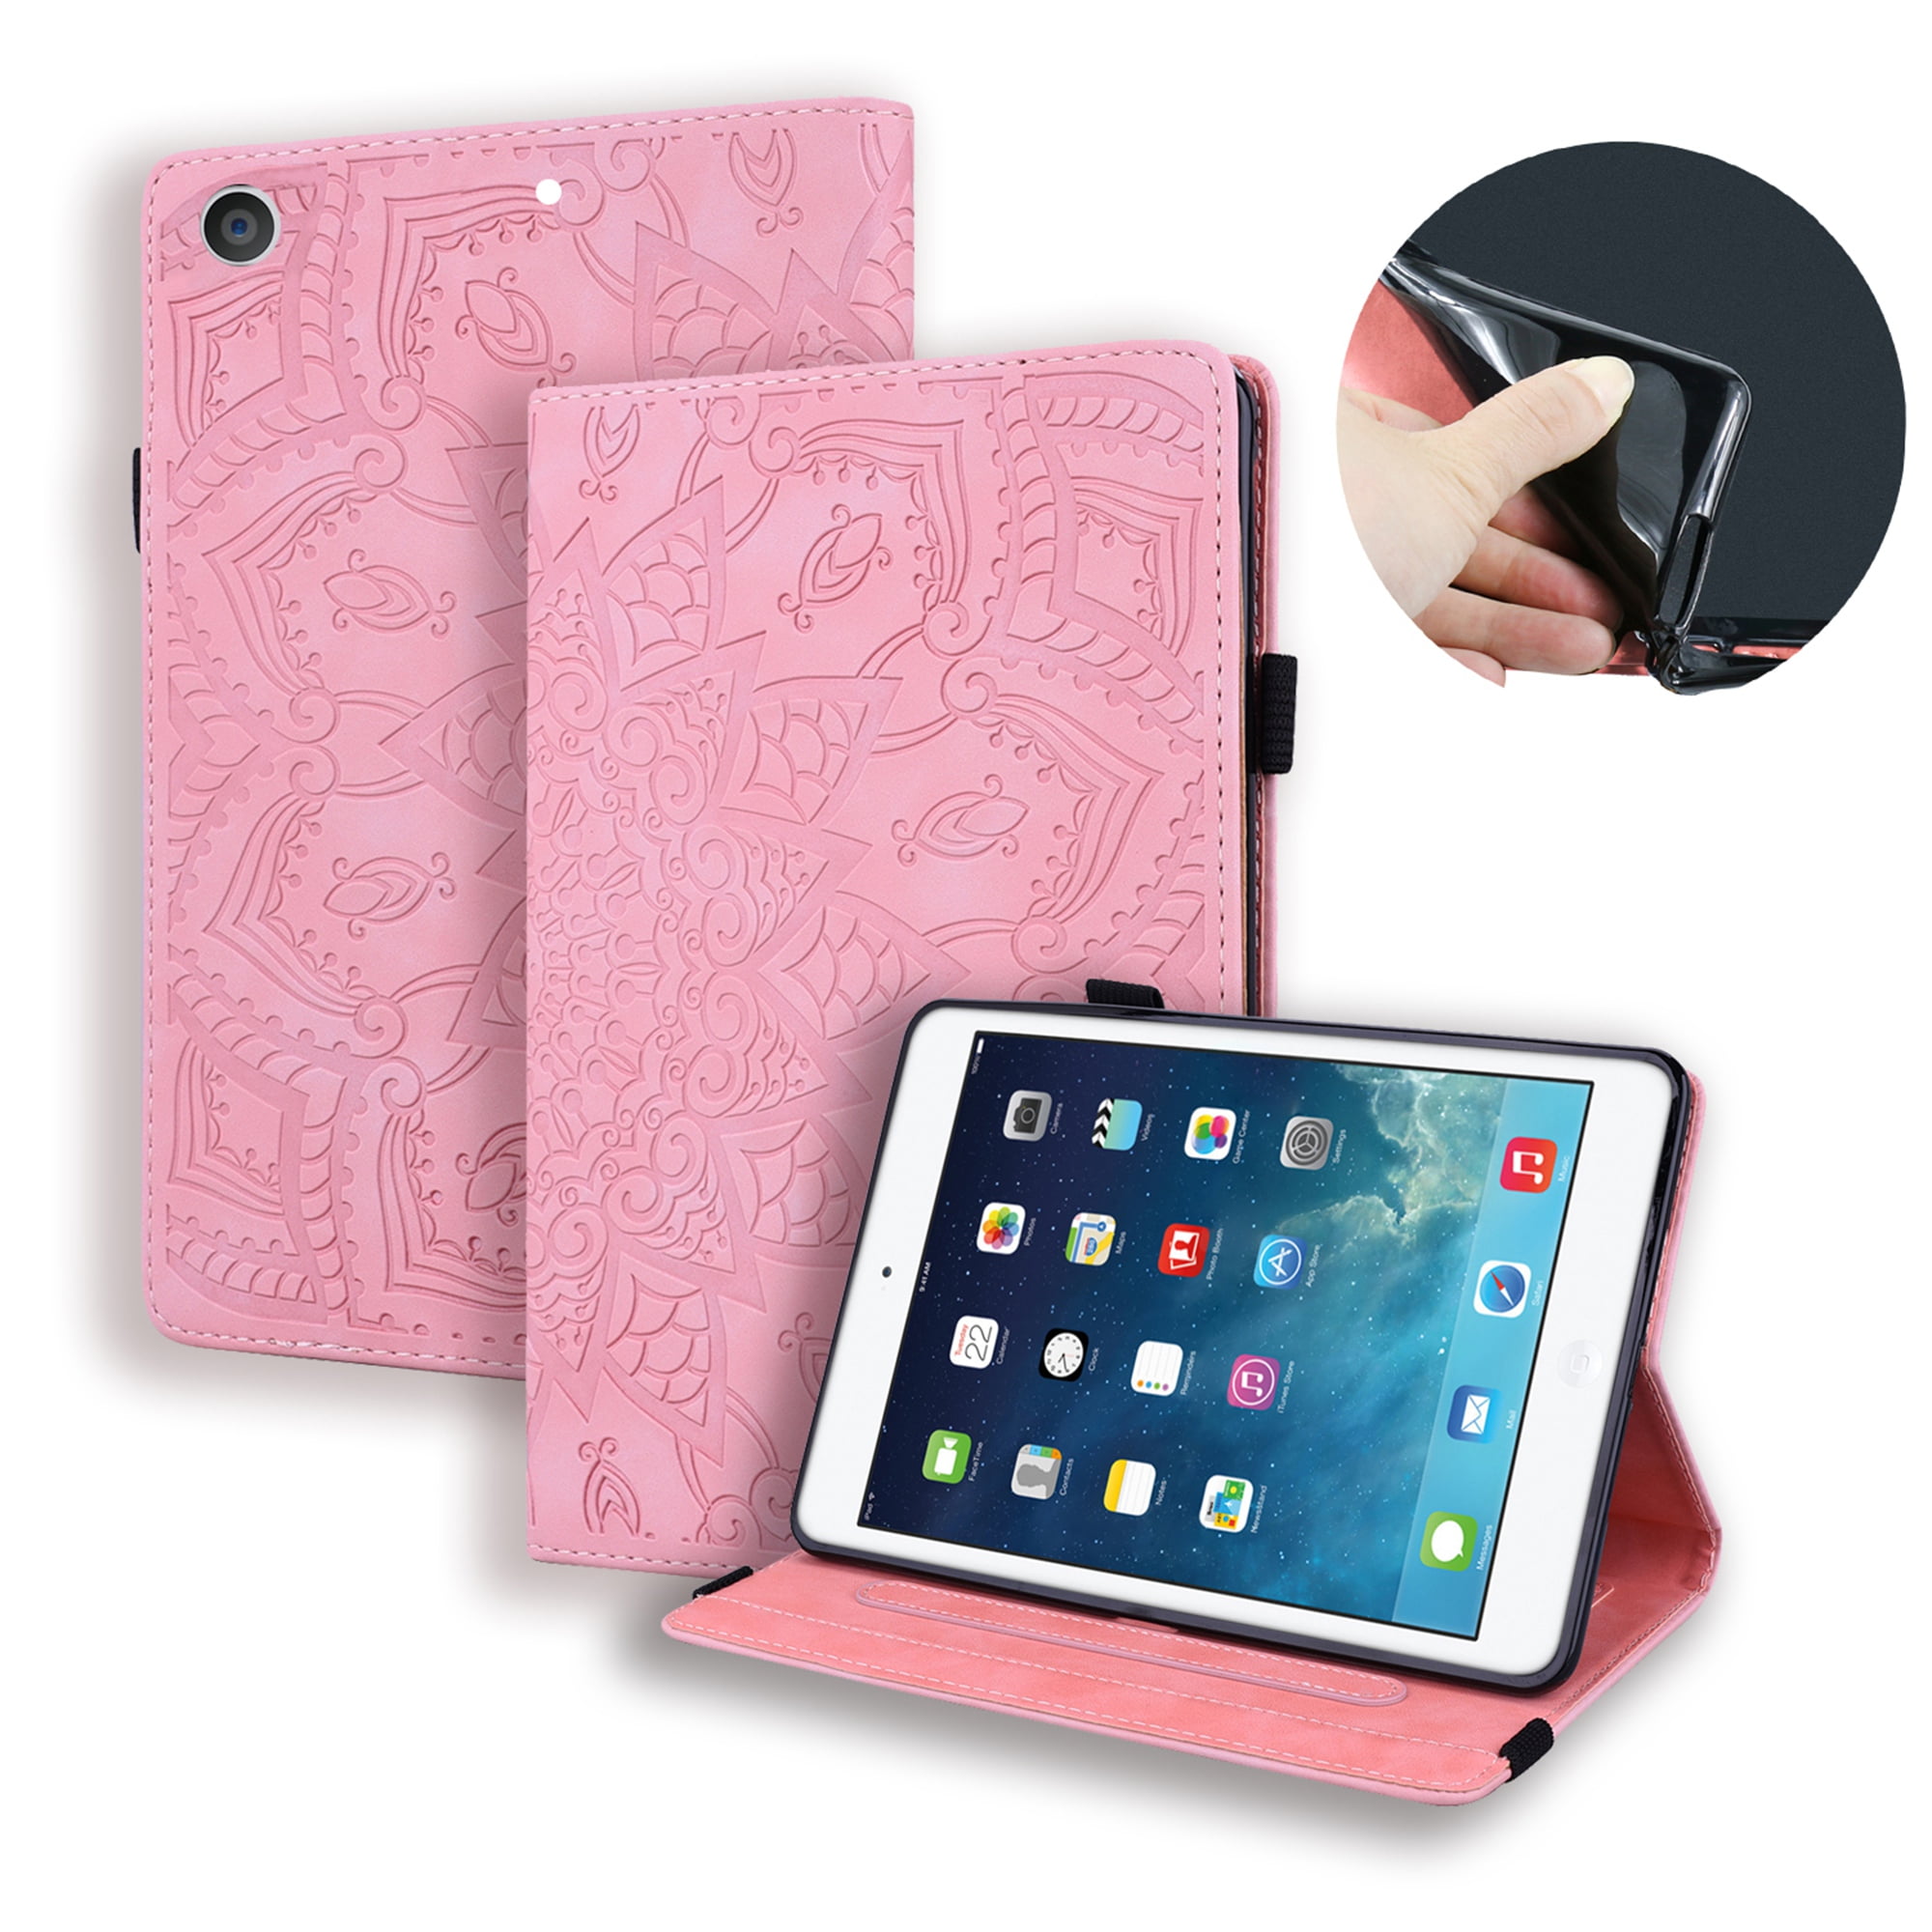 Leather PU Smart iPad Case Cover Flip Stand For iPad 10.2" 7th Generation 2019 